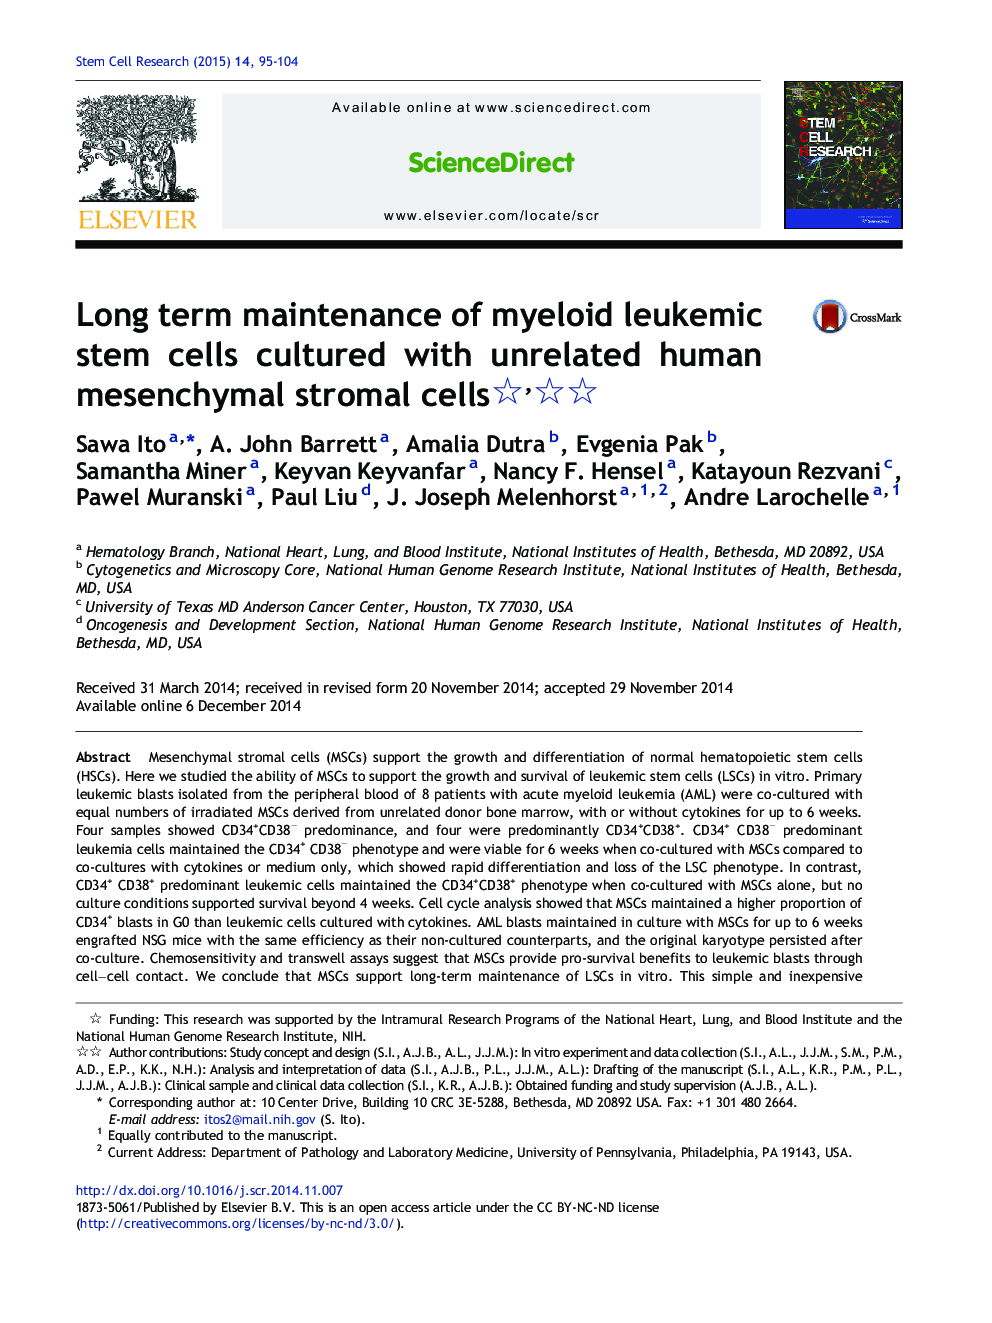 Long term maintenance of myeloid leukemic stem cells cultured with unrelated human mesenchymal stromal cells 